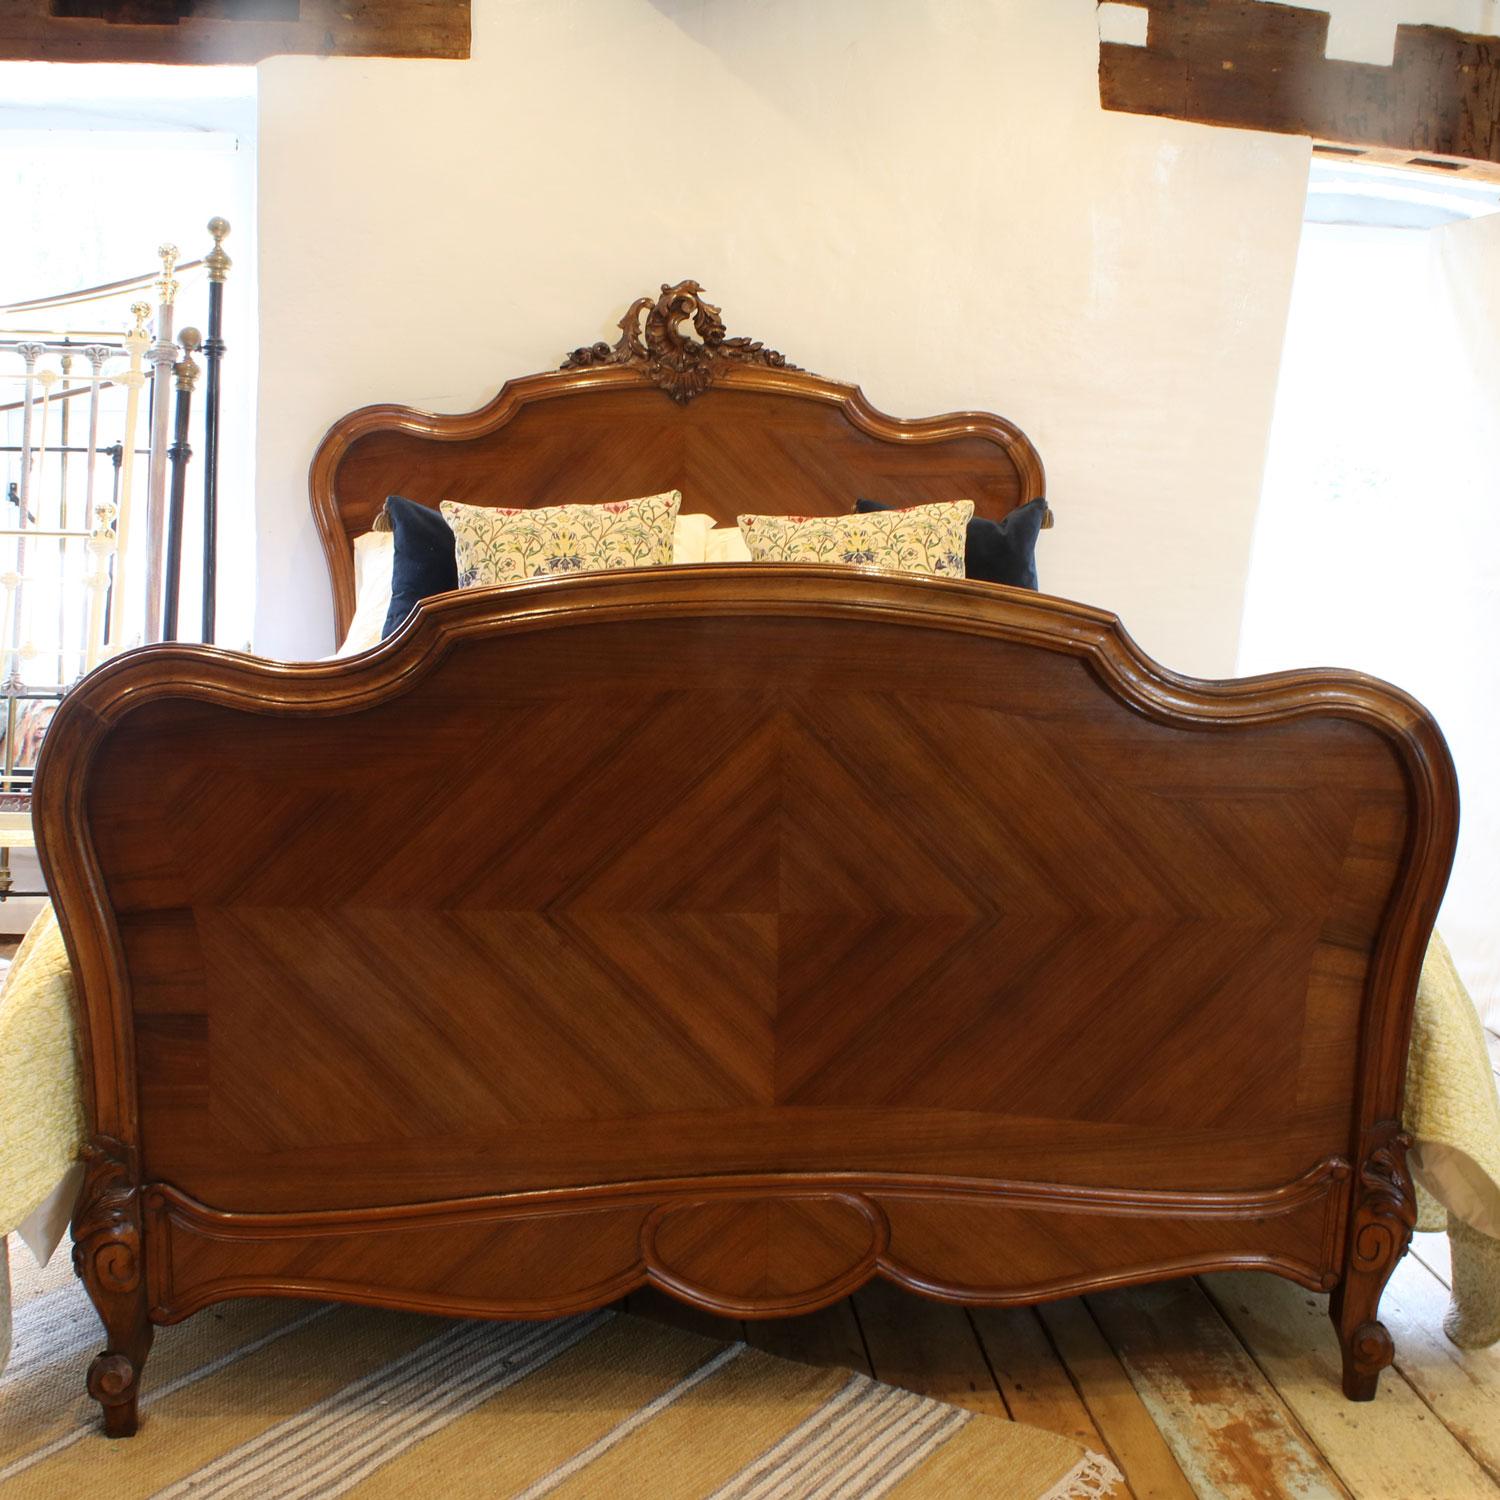 A fine Louis XV style walnut bed with rich tones, and decoratively carved head mount.

This bed accepts a British king size or American queen size, 5ft wide (60 inches or 150cm) base and mattress set.

The price is for the bed and a firm bed